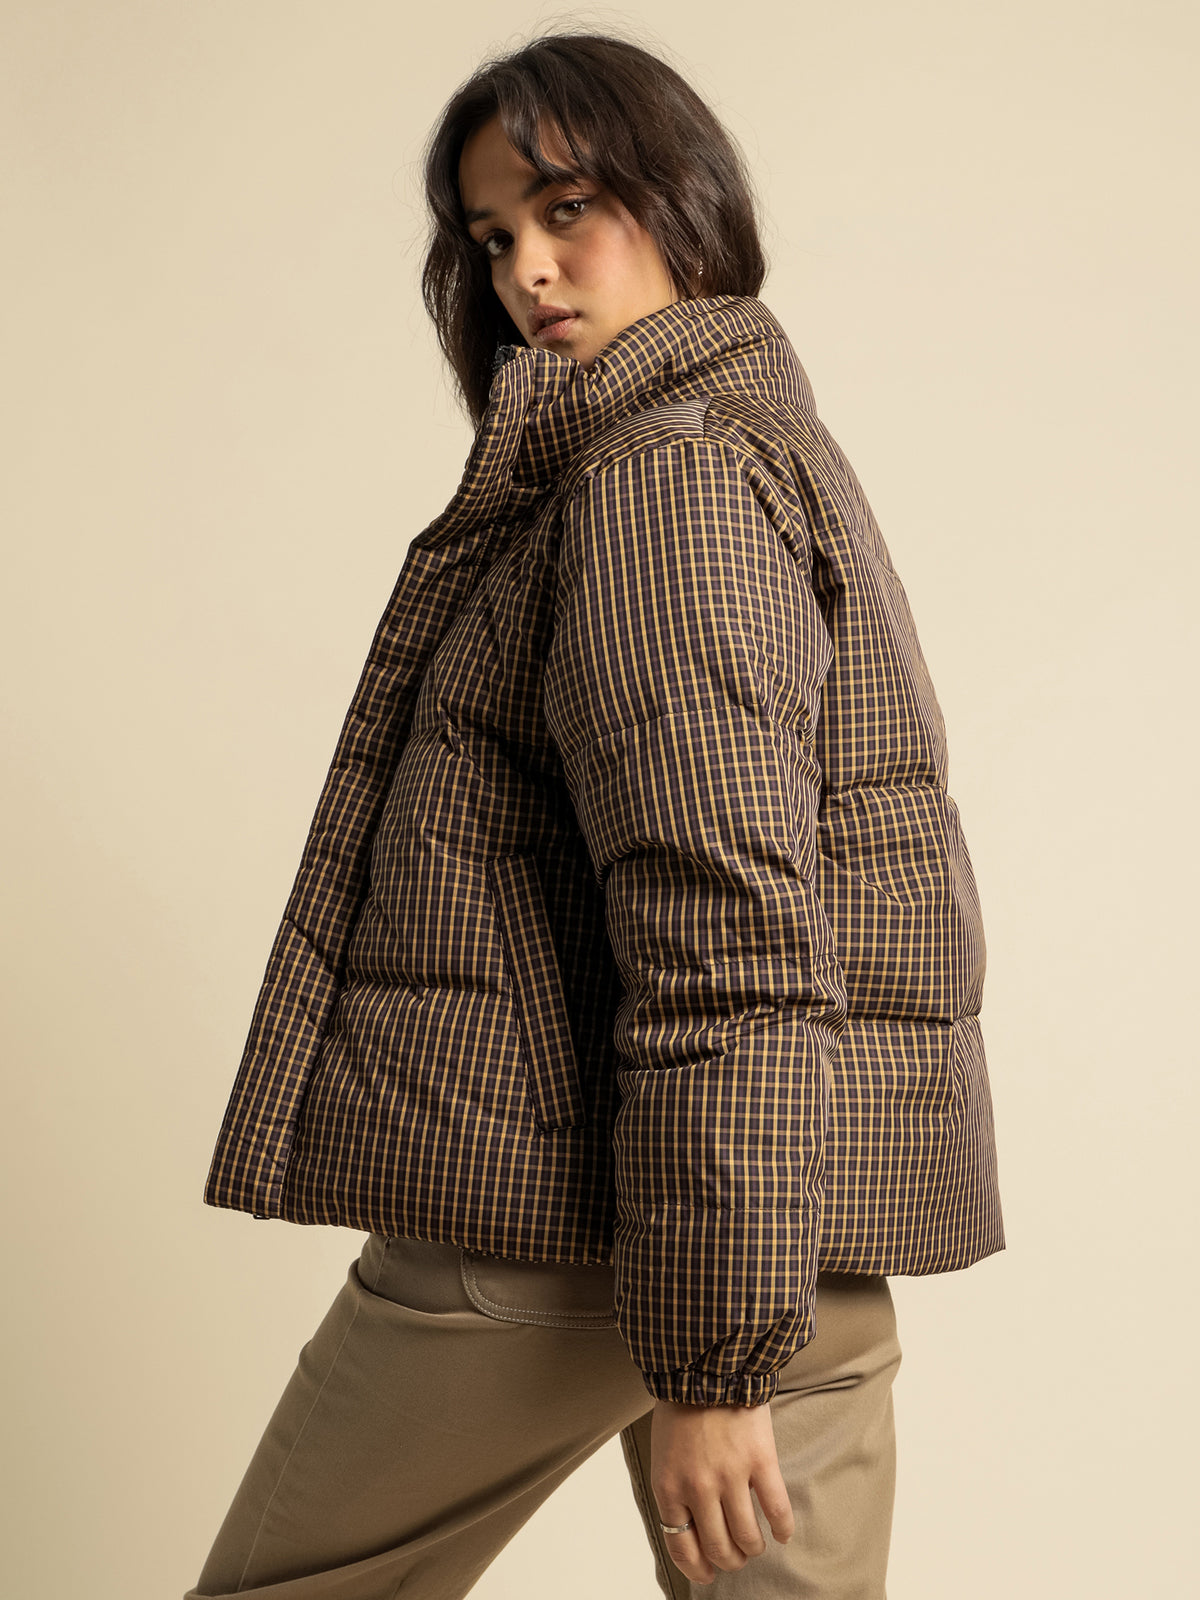 Danville Puffer Jacket in Check